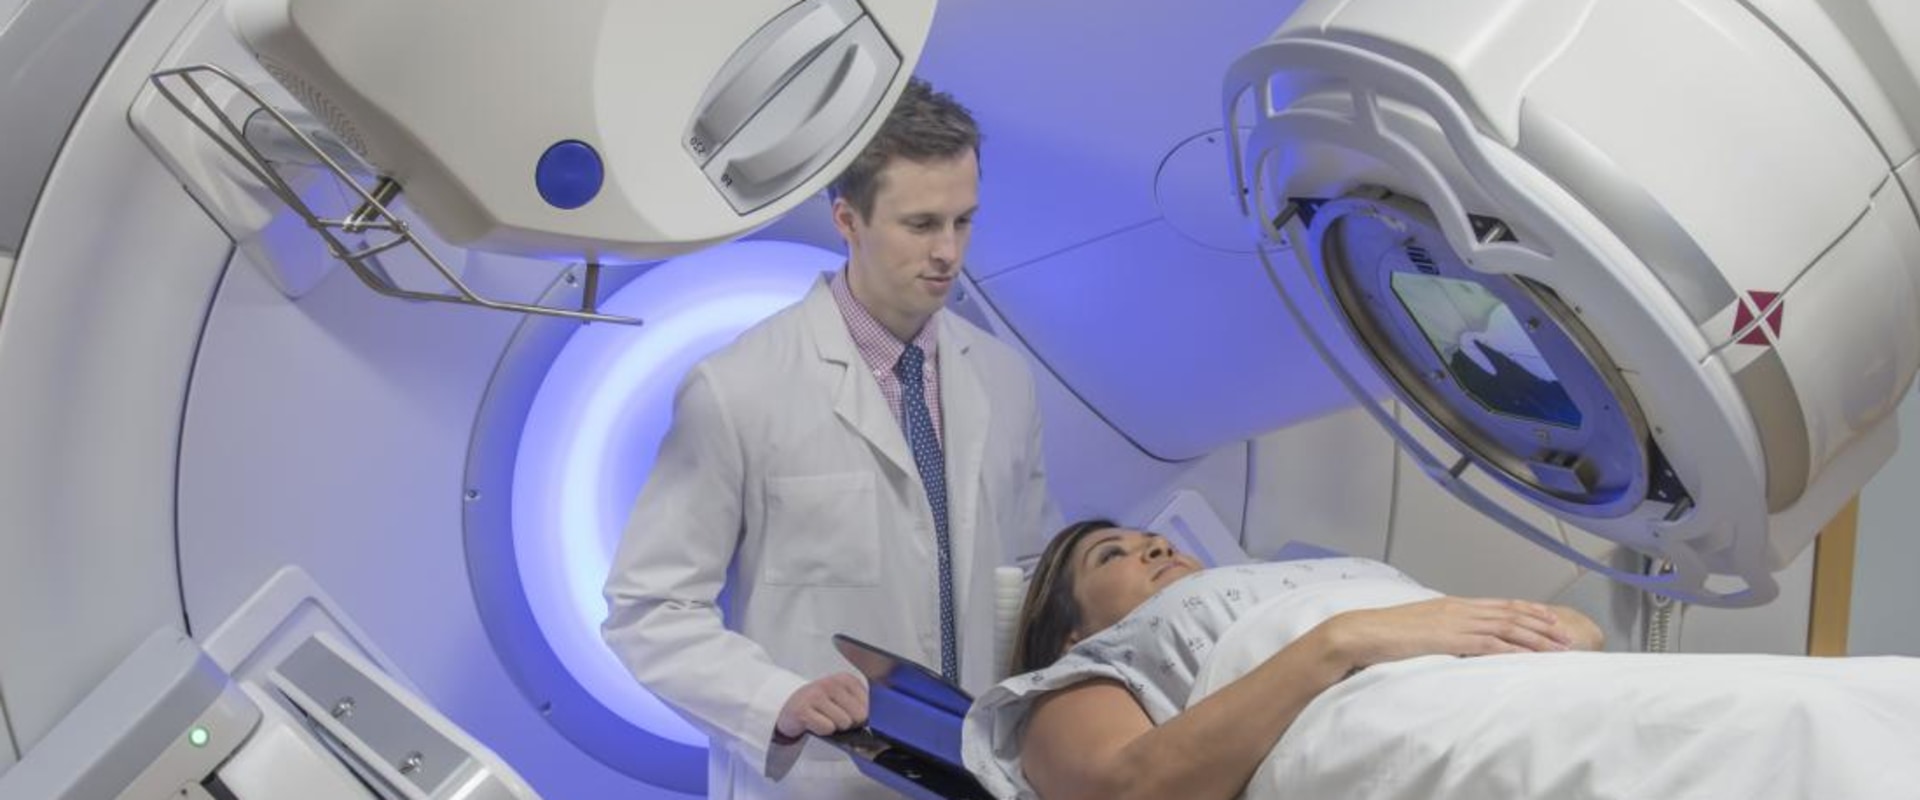 Can cancer radiation kill you?